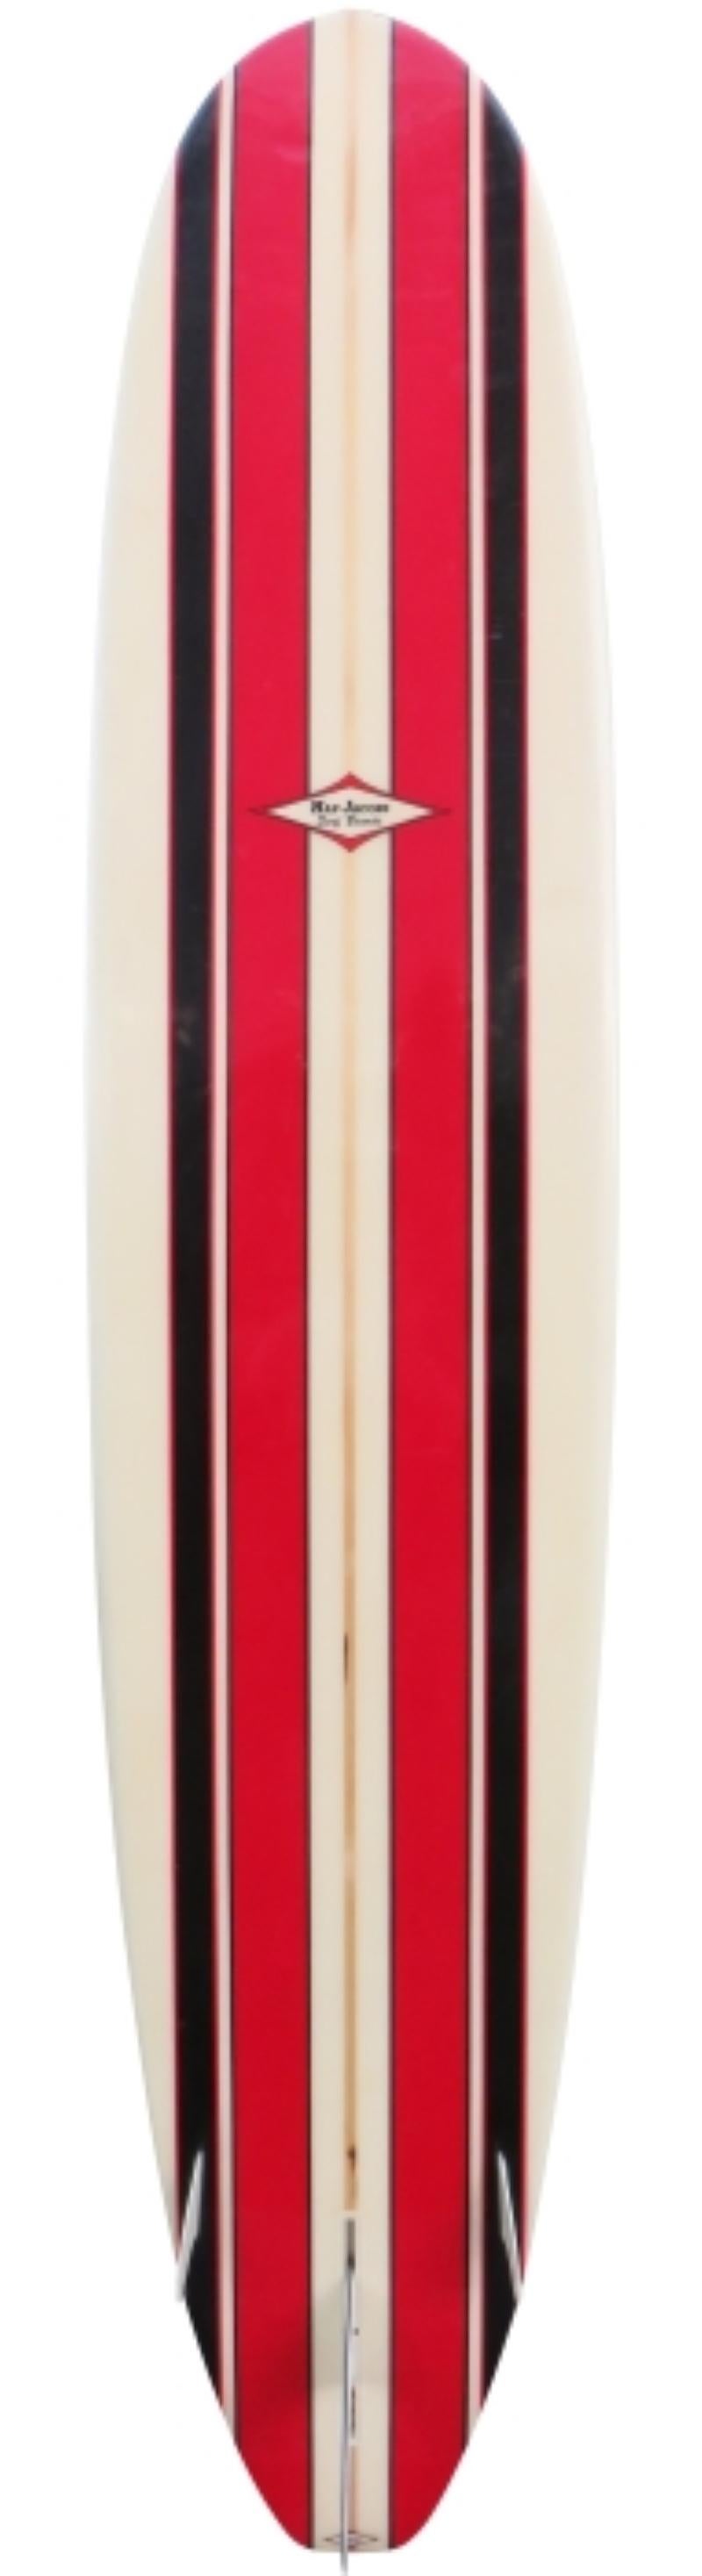 Hap Jacobs classic longboard featuring beautiful red and black panels with box single fin and side trailing fins. Shaped and signed by the legendary Hap Jacobs. A great example of a classic Hap Jacobs longboard.

In 1953, Hap Jacobs partnered with